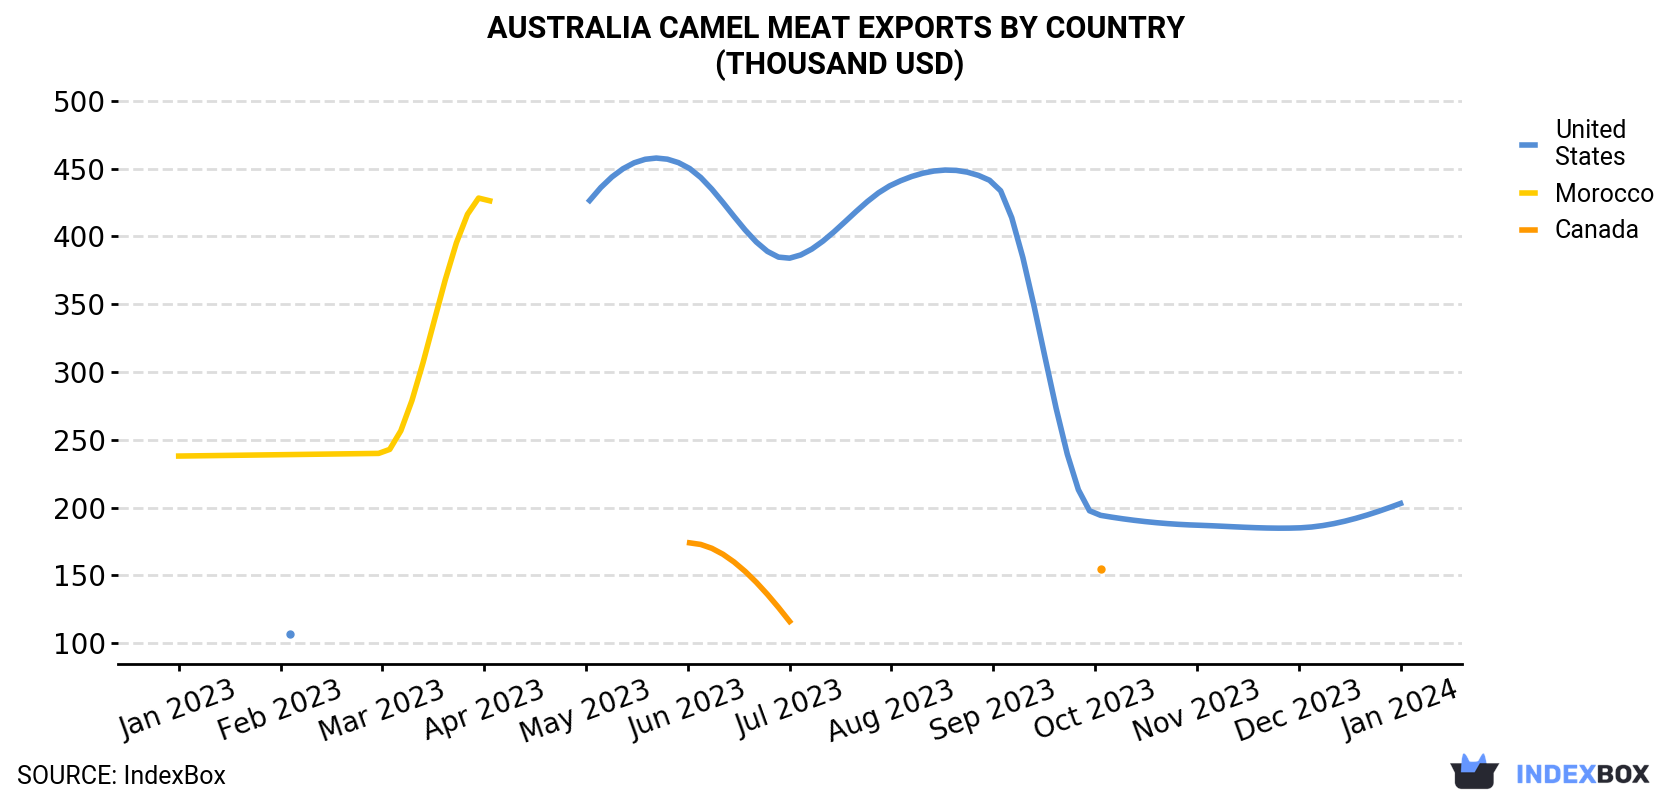 Australia Camel Meat Exports By Country (Thousand USD)